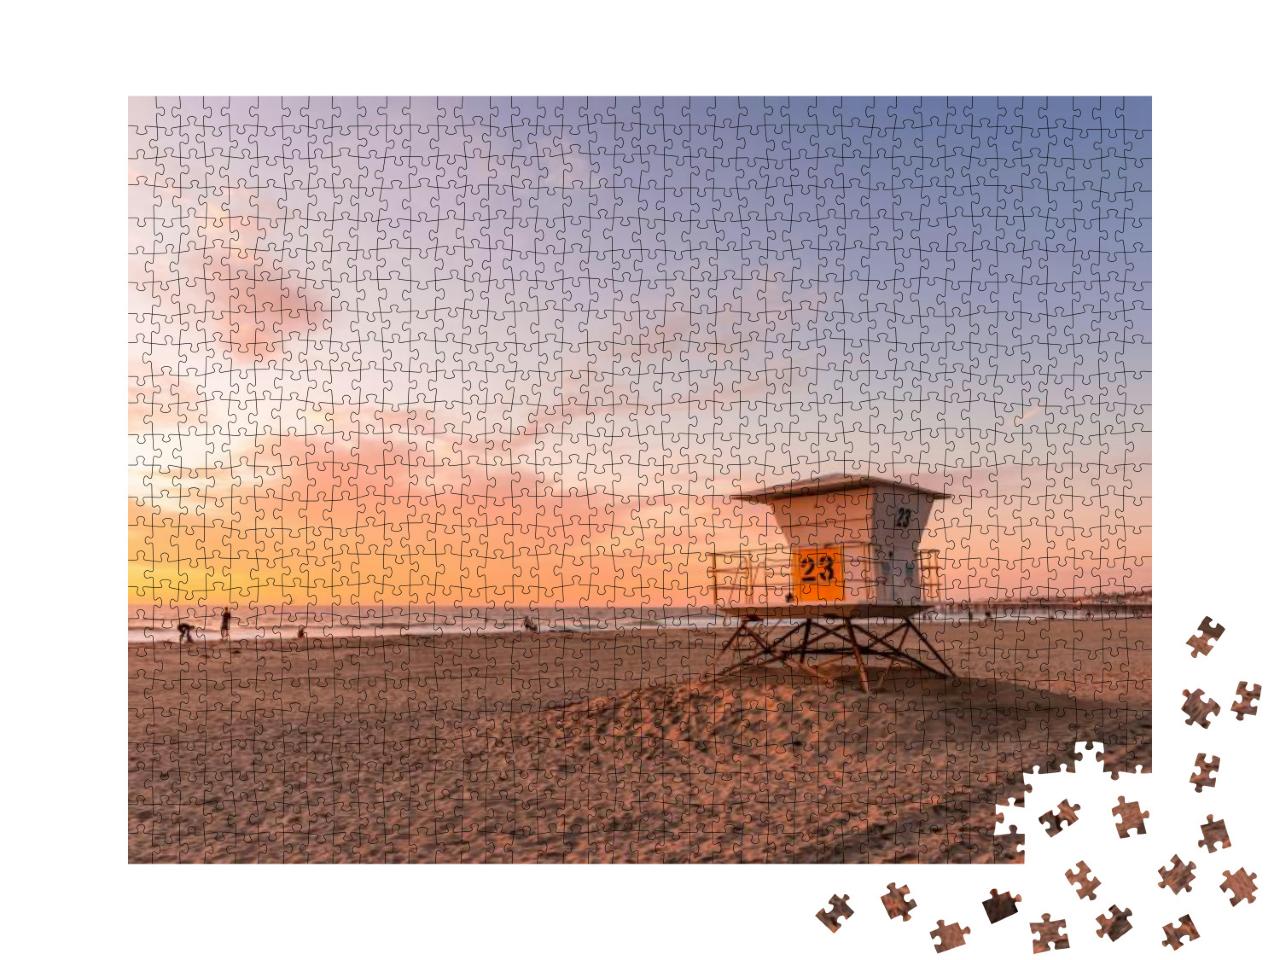 Puzzle 1000 Teile „Lifeguard Tower am Strand bei Sonnenuntergang“